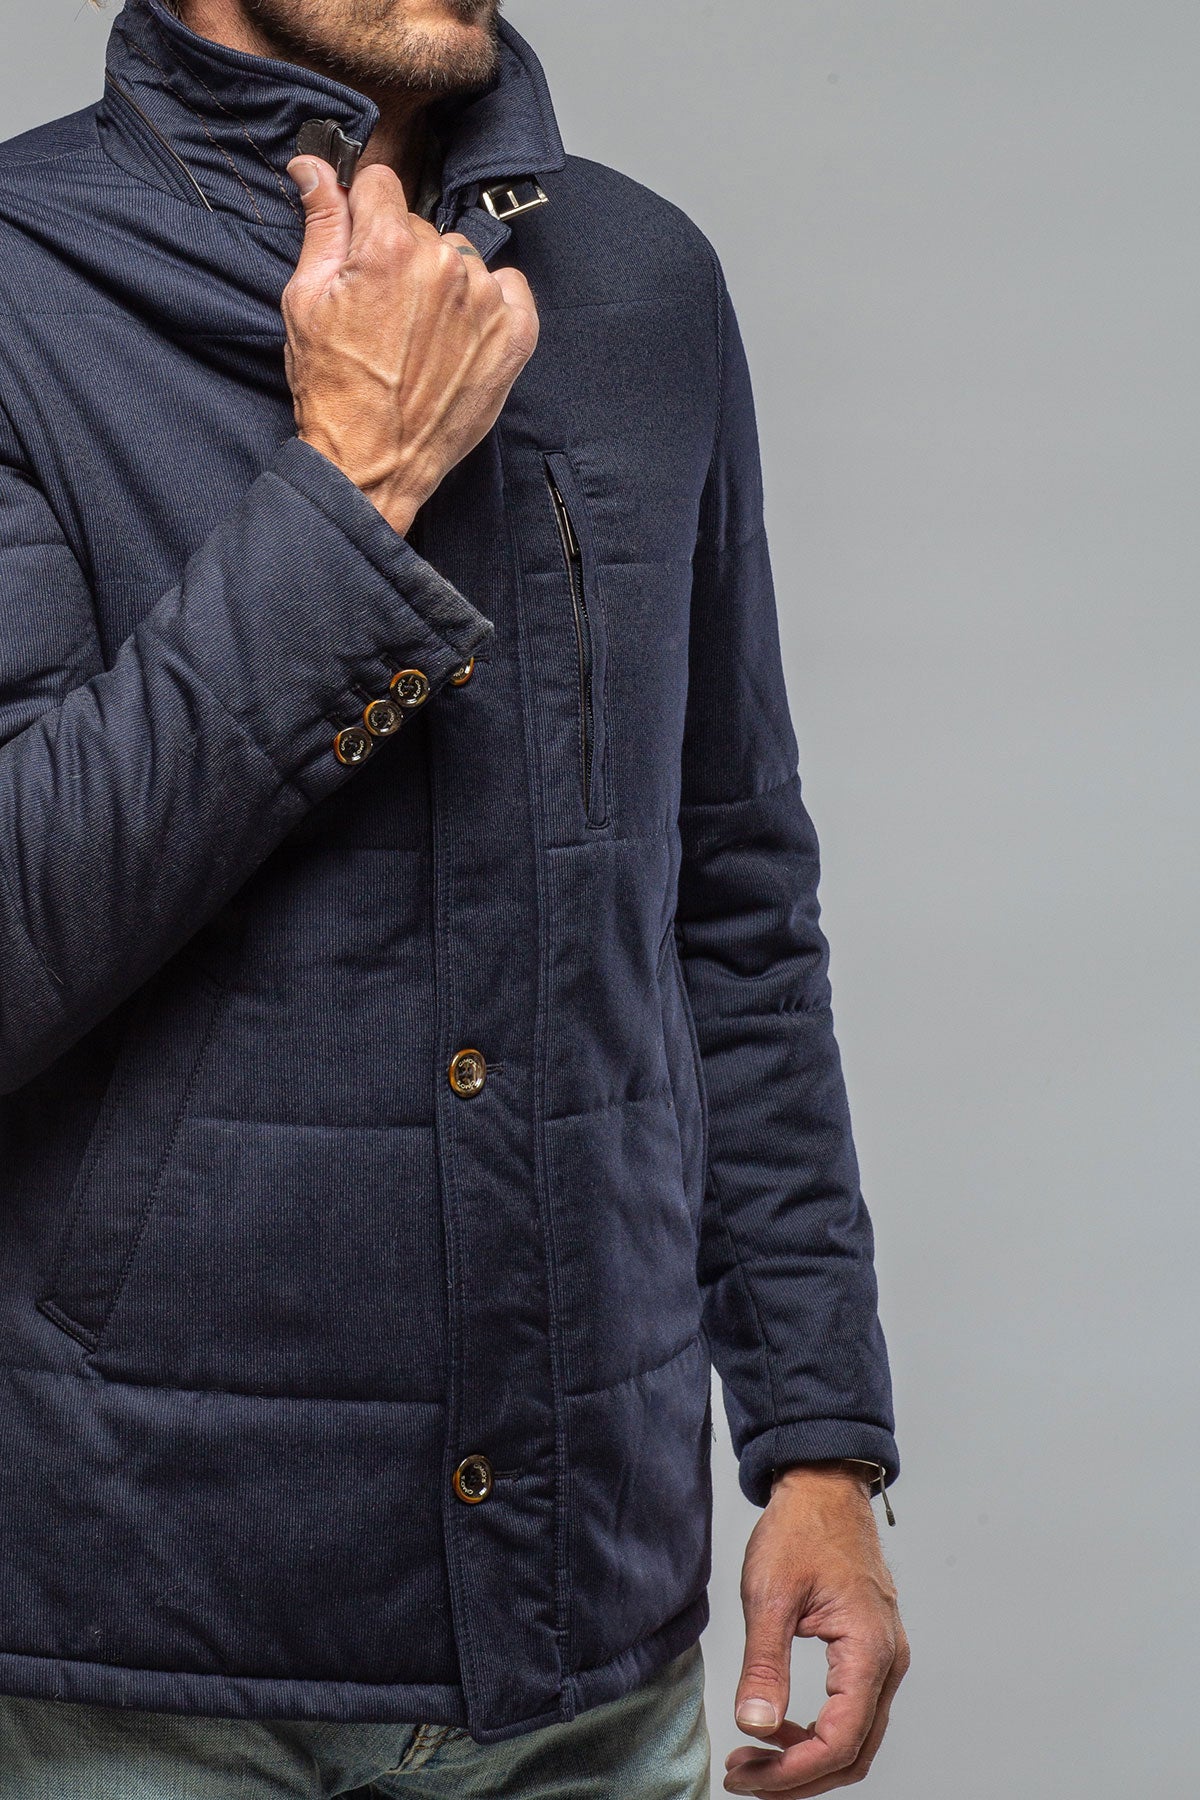 Anderson Wool Campus Jacket | Warehouse - Mens - Outerwear - Cloth | Gimo's